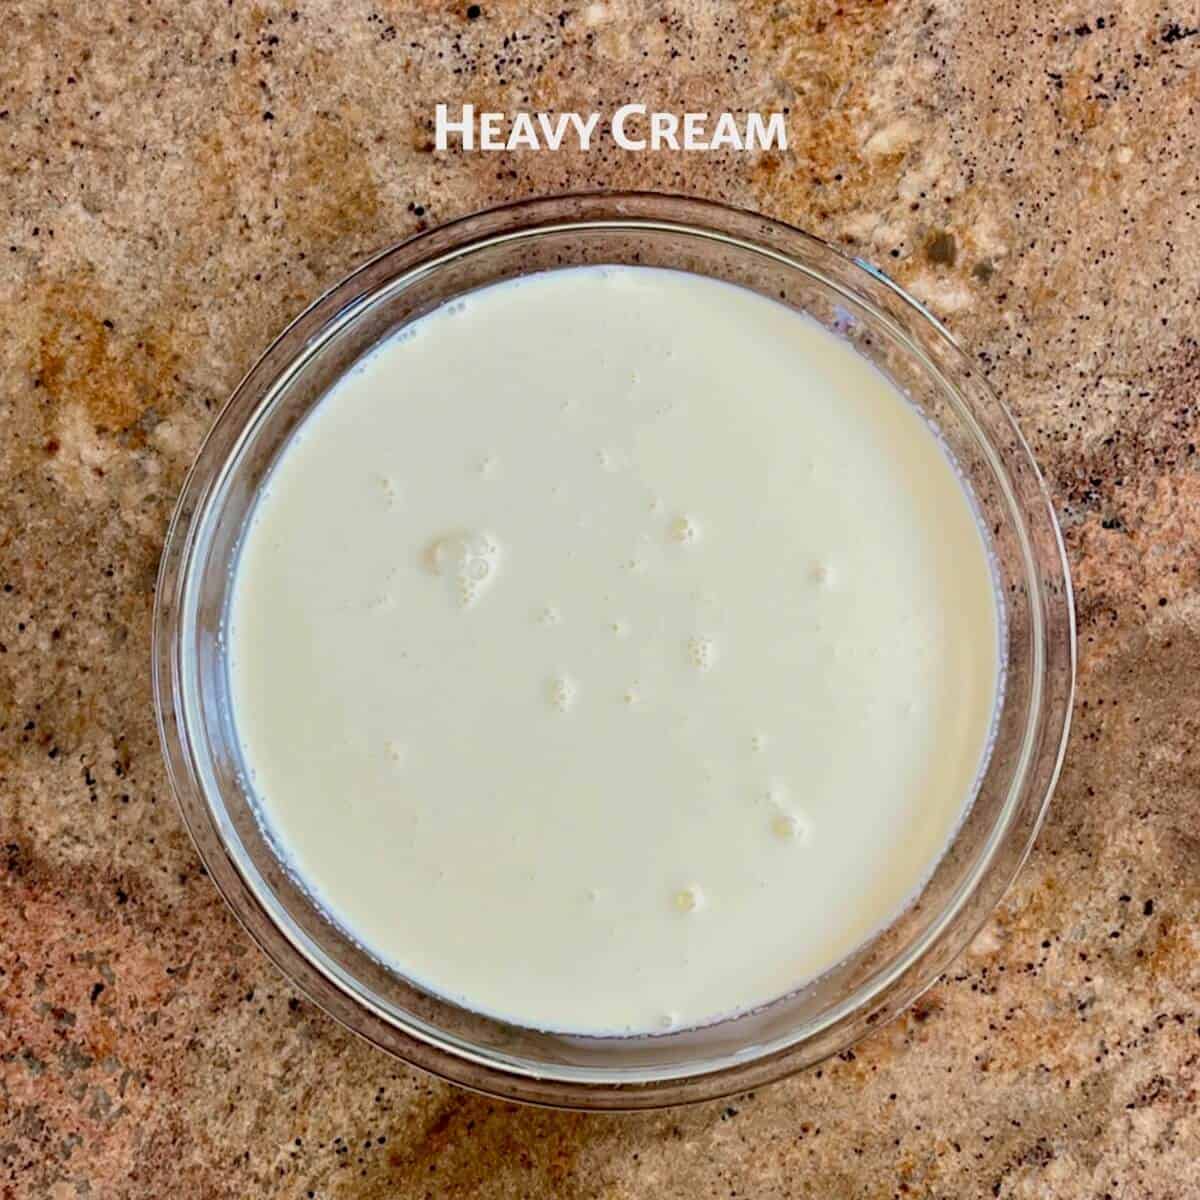 Heavy cream in a glass pie pan from overhead.